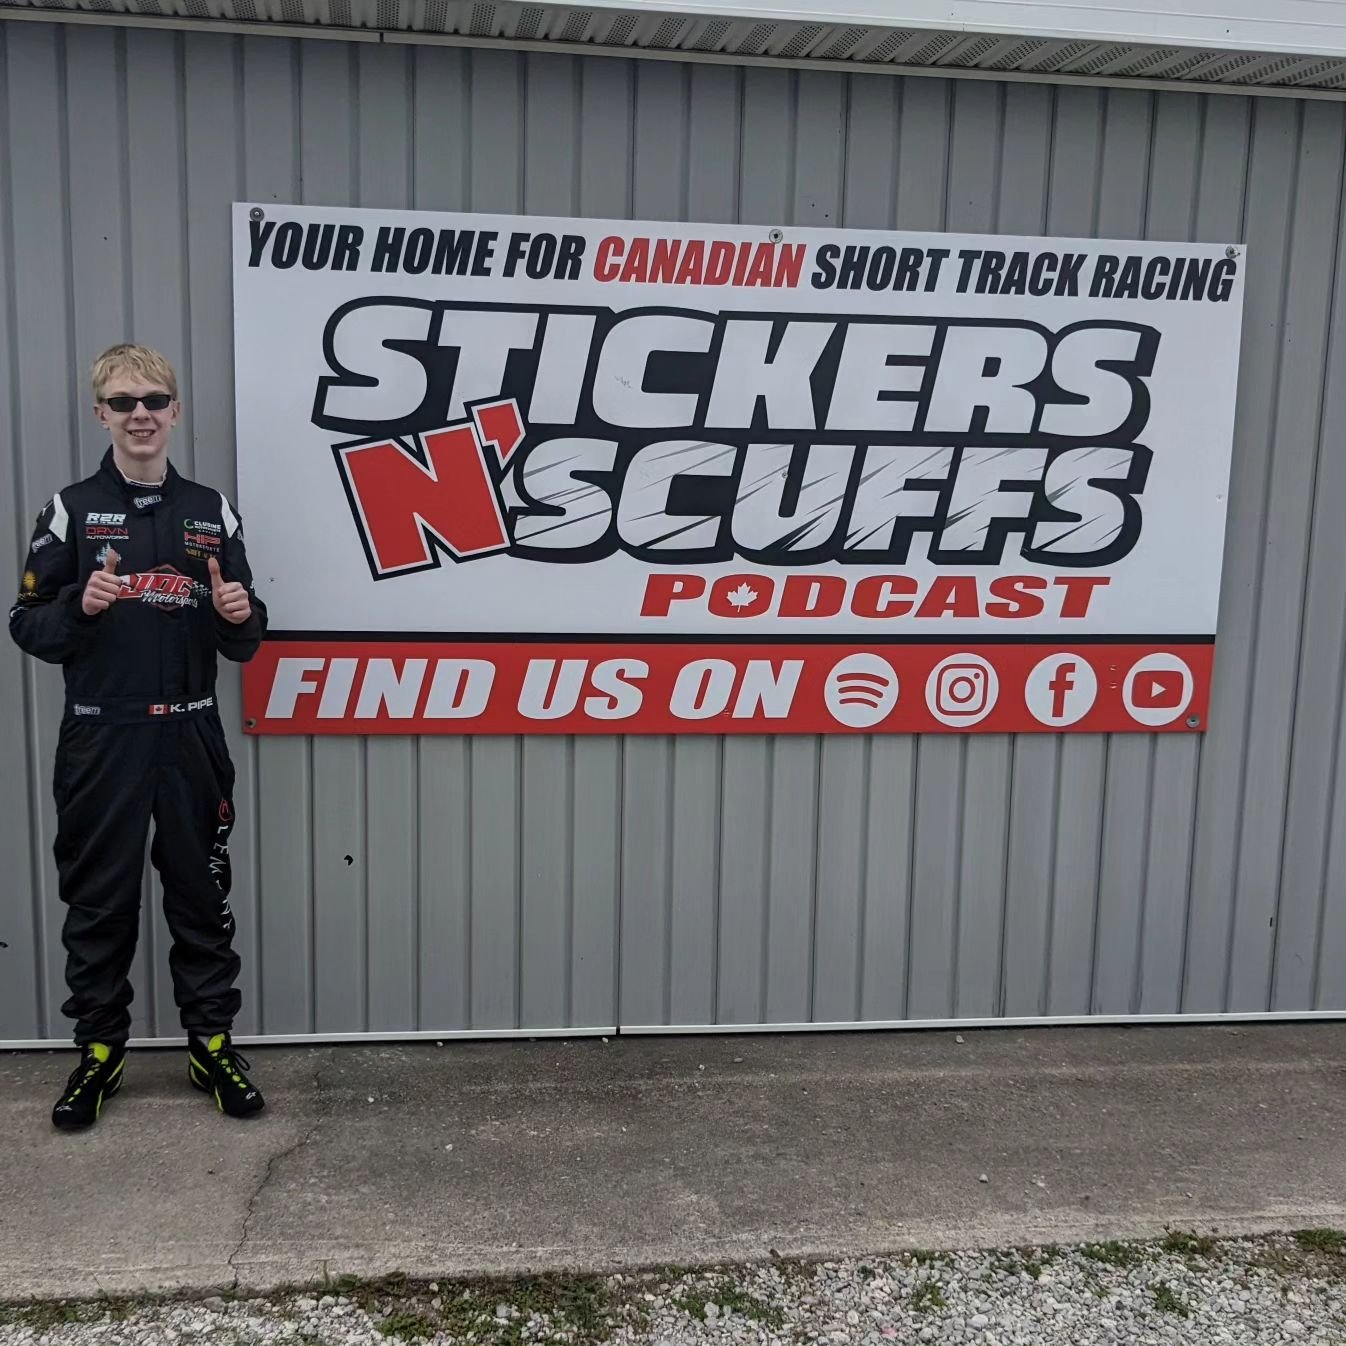 So happy to be part of the @stickersnscuffs racing family ! 

@camkracing &amp; @graydonbunn host the Stickers N' Scuffs Podcast, highlighting all the excitement of Canadian Short Track Racing. They also promote a number of drivers, and I am proud to